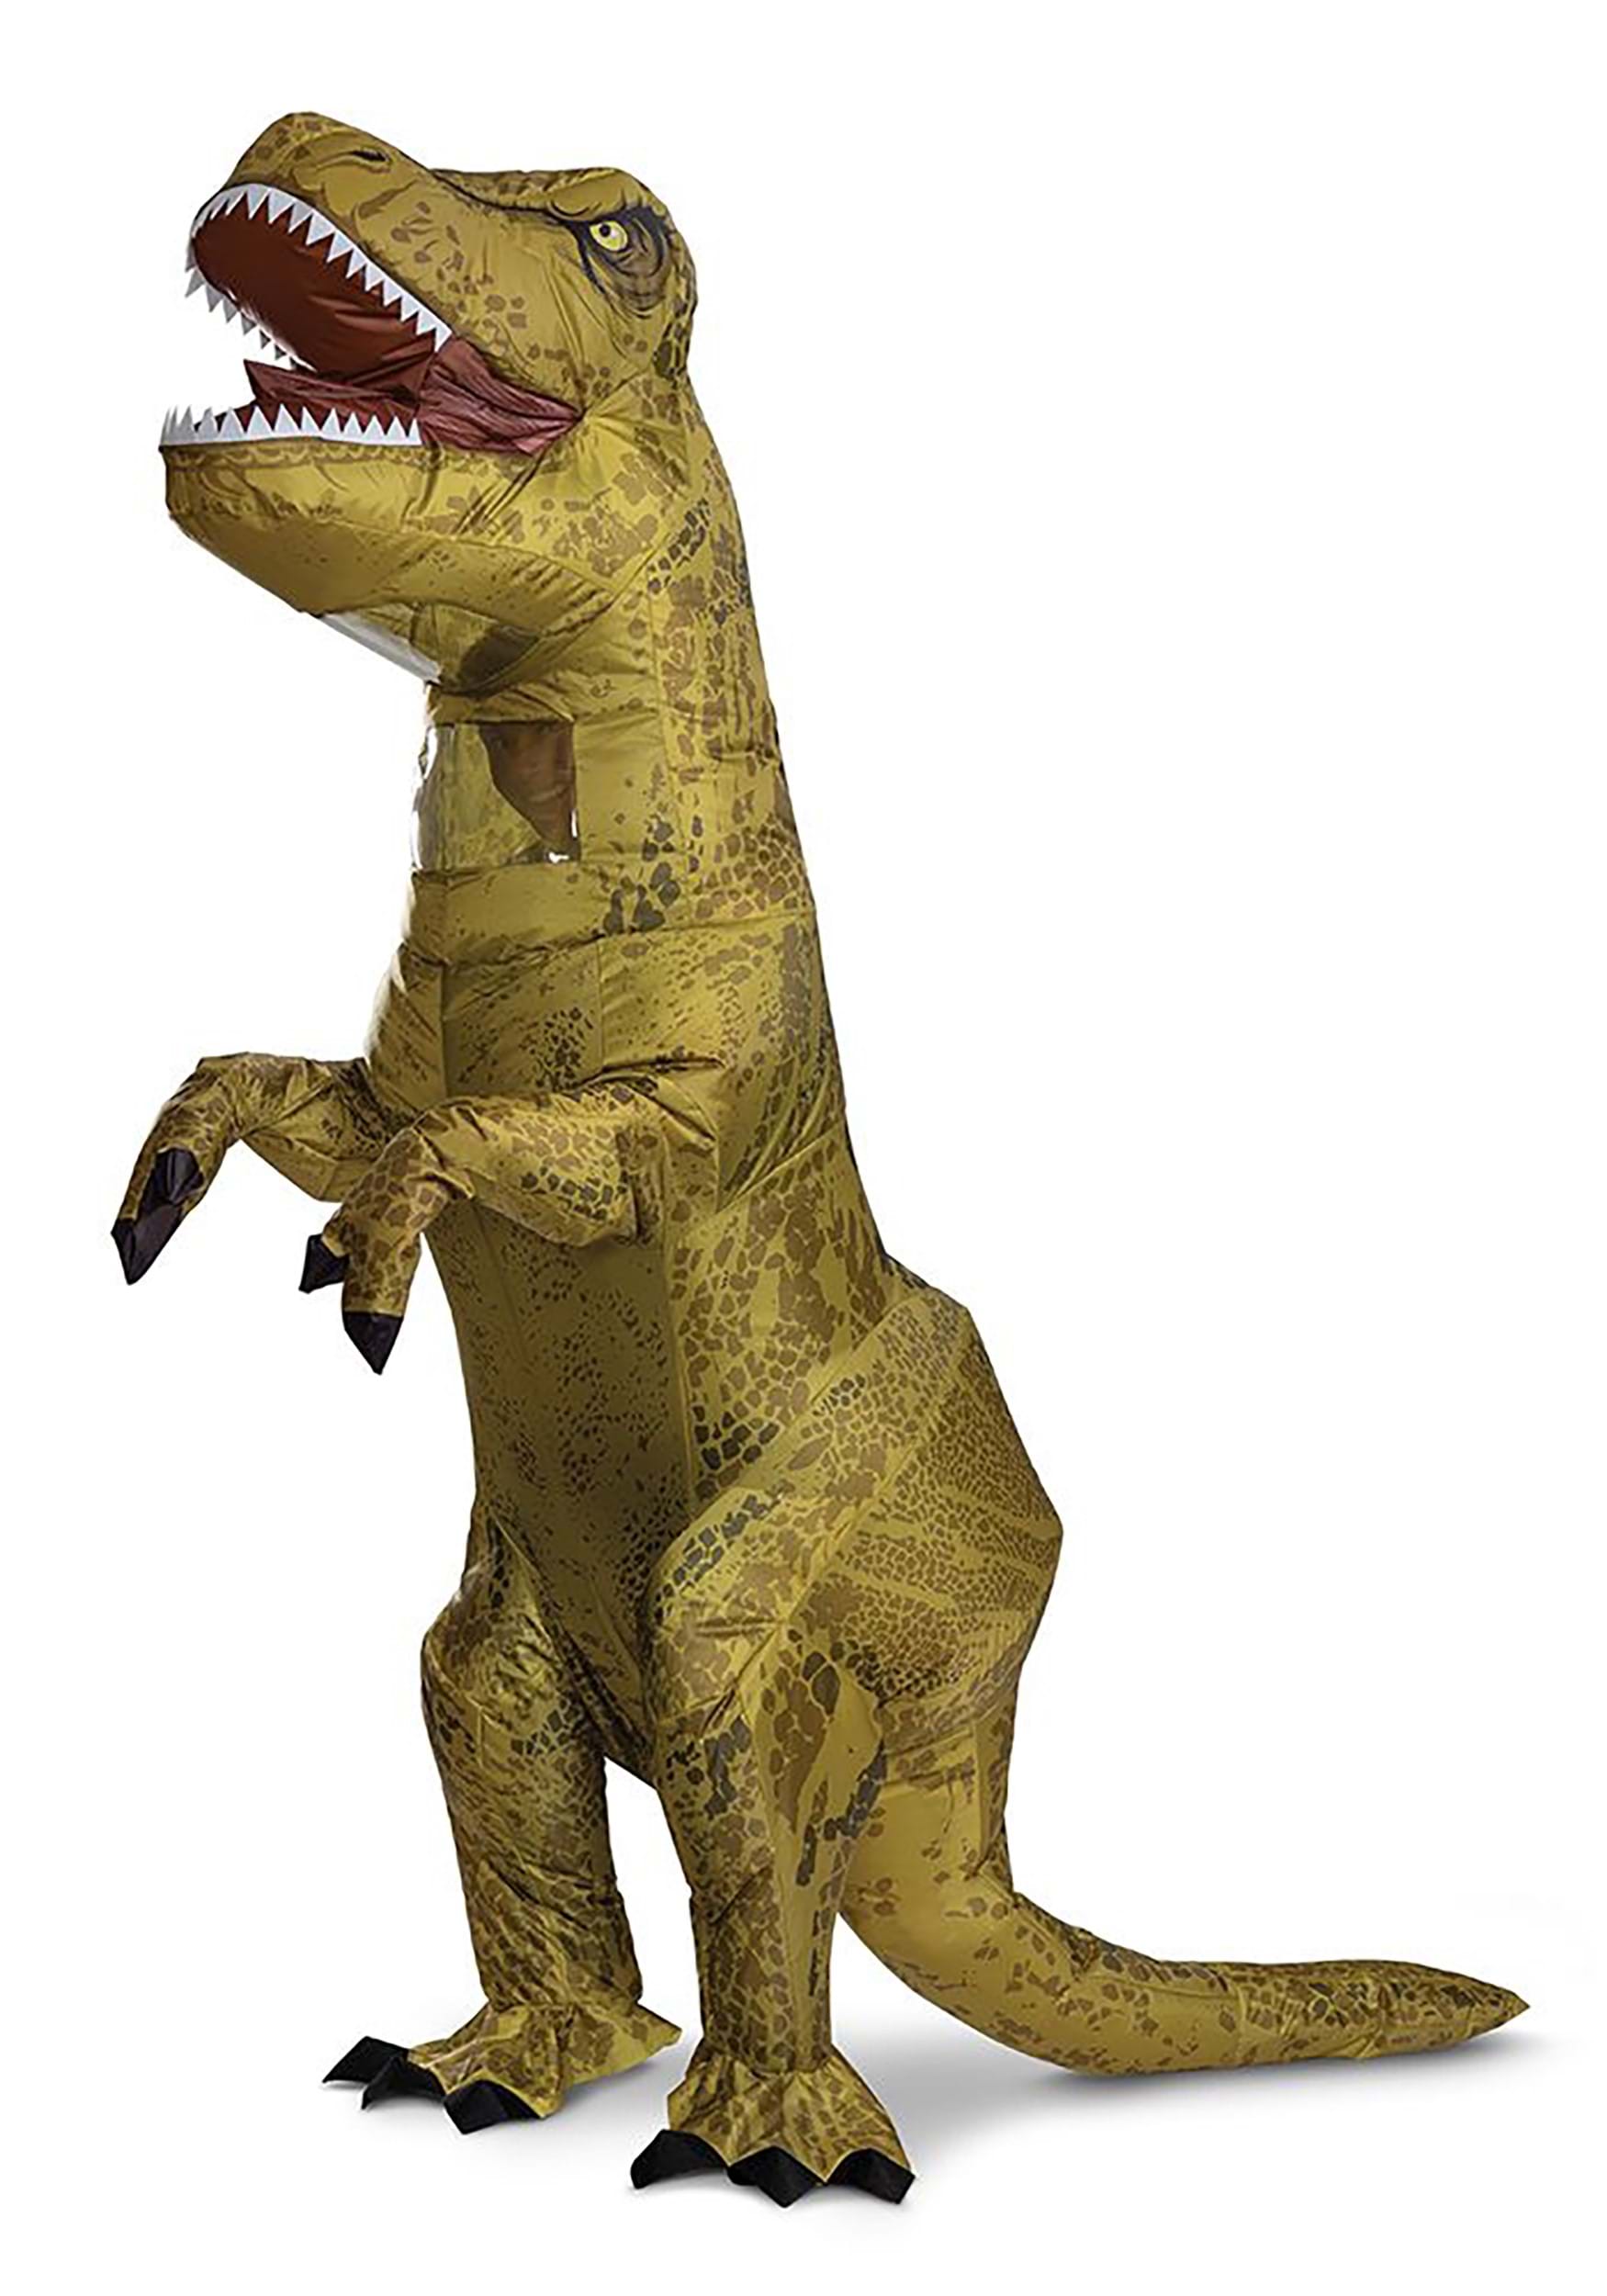 Image of Adult Jurassic World T-Rex Inflatable Costume ID DI145169AD-ST